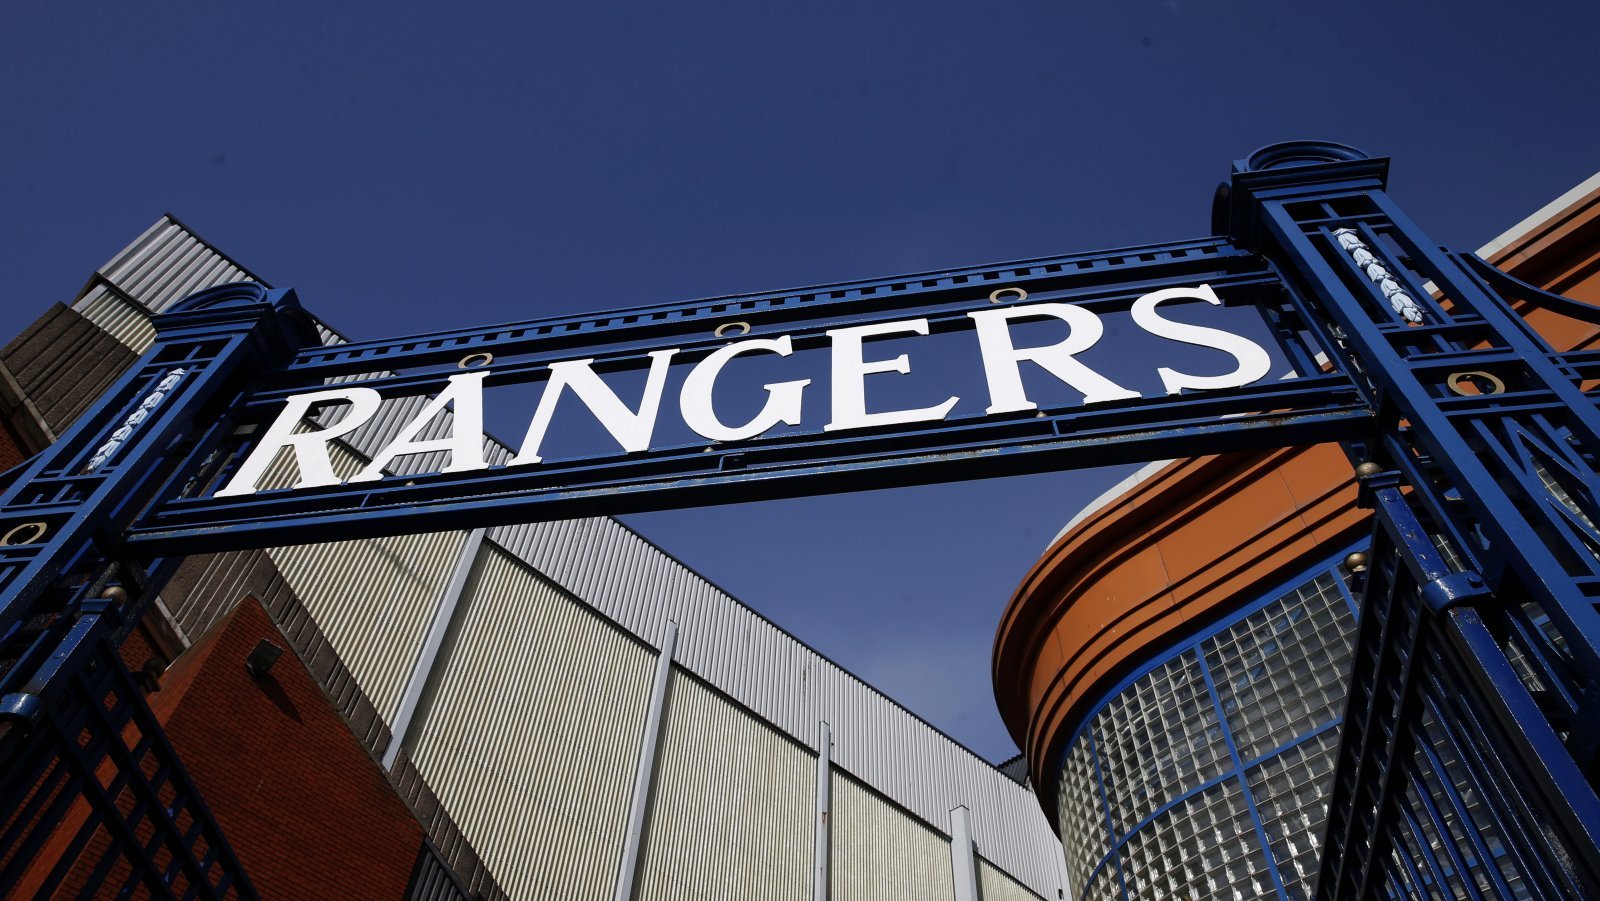 Gers fans jitters for first Old Firm derby